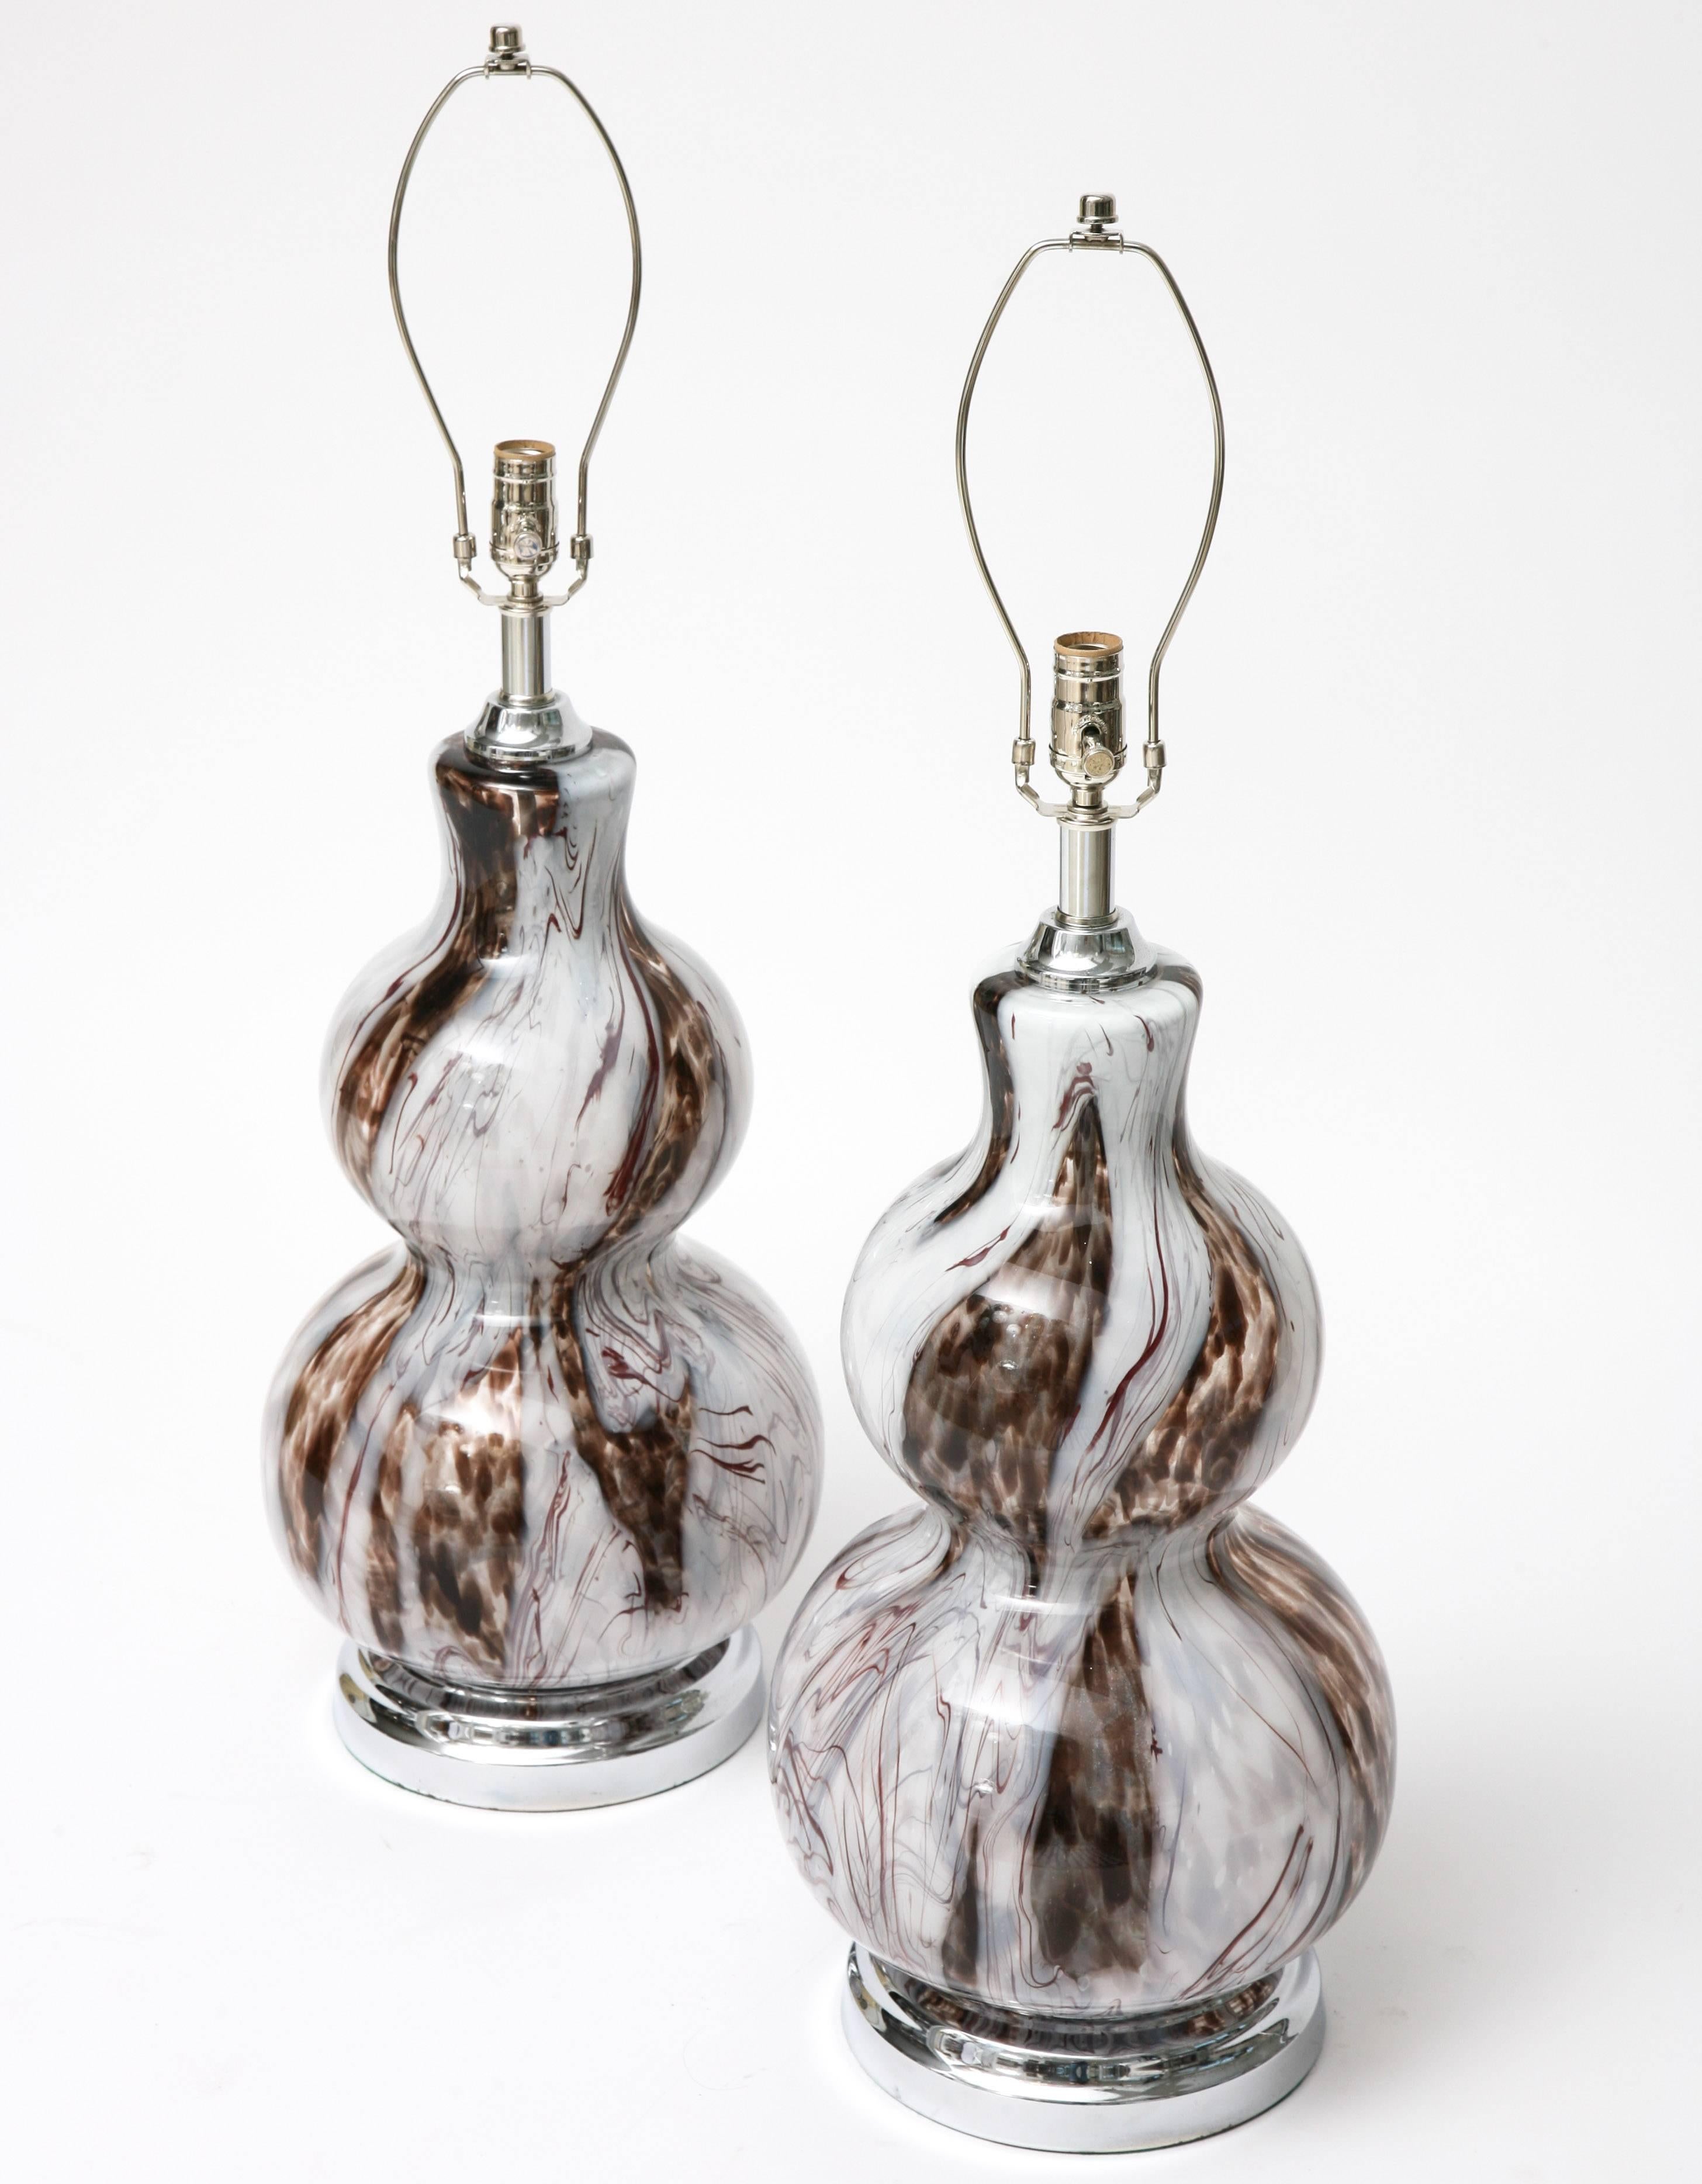 This spectacular, large-scale pair of table lamps date for the 1970s and are fabricated with Murano glass, gourd-shaped bases with polished chrome base and sockets.
 
The Murano glass is translucent in colors of clear, off-white and root-beer